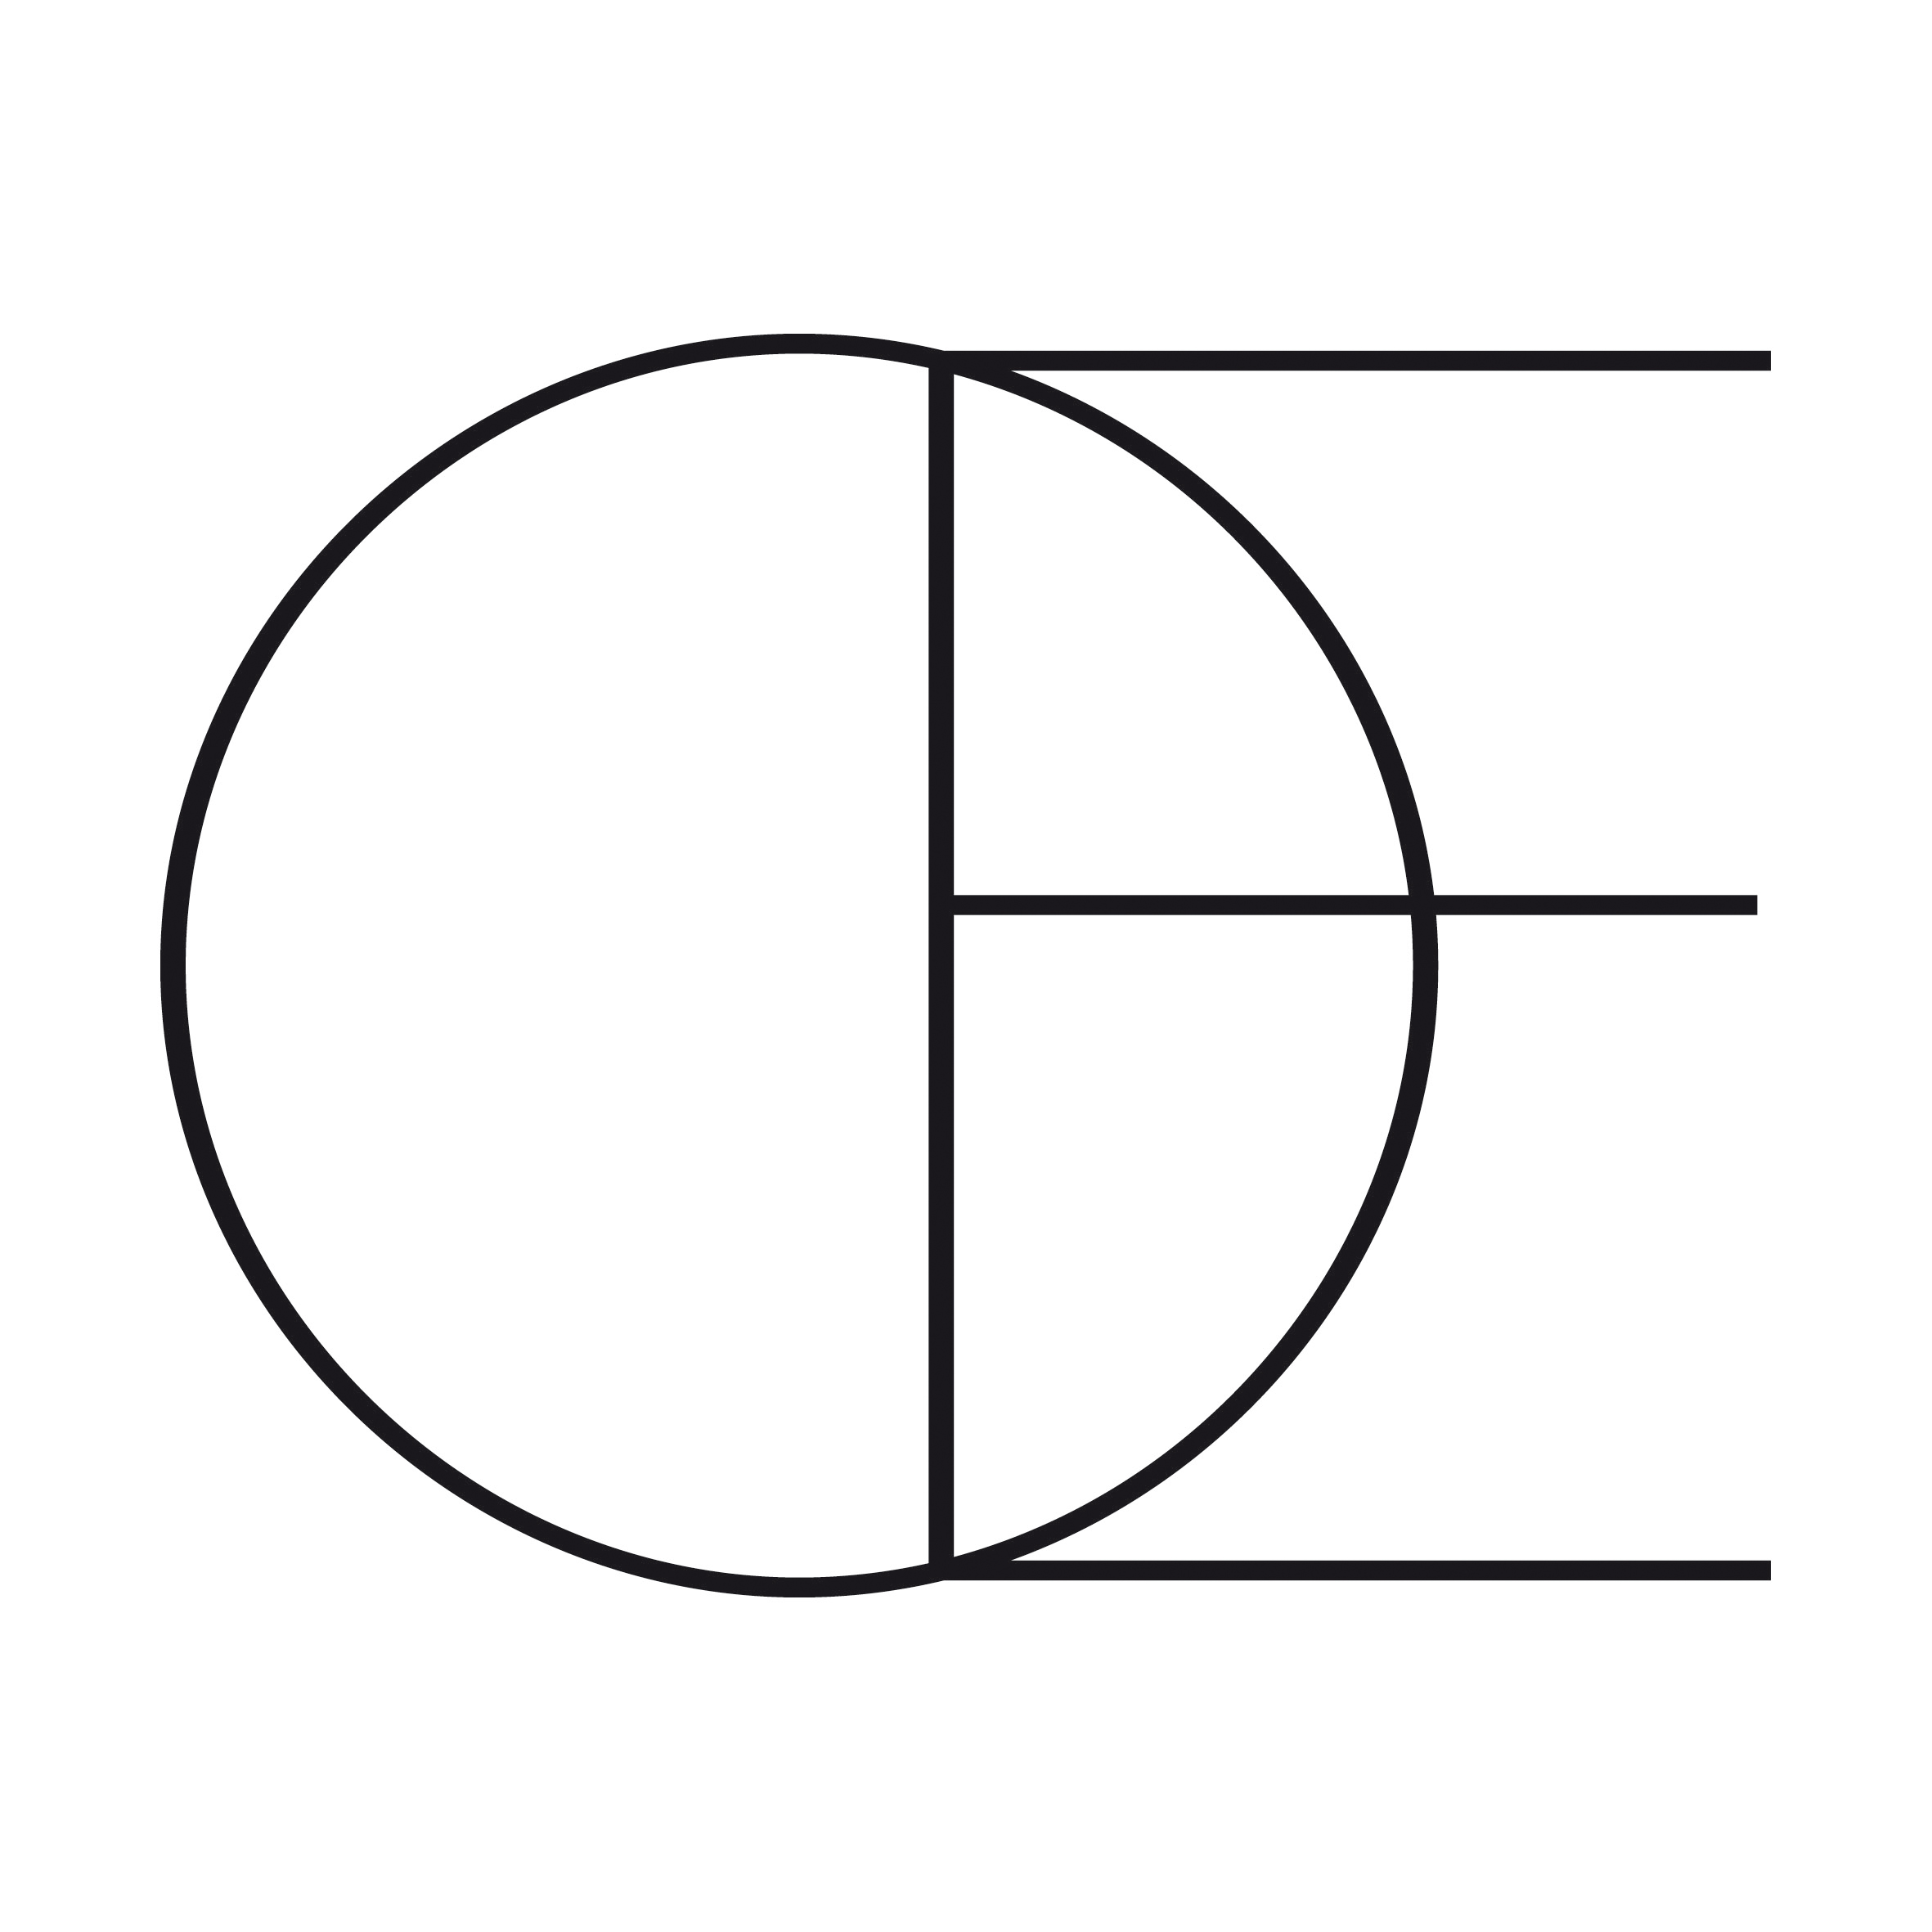 Logo of Piquee's client Oe_magazine